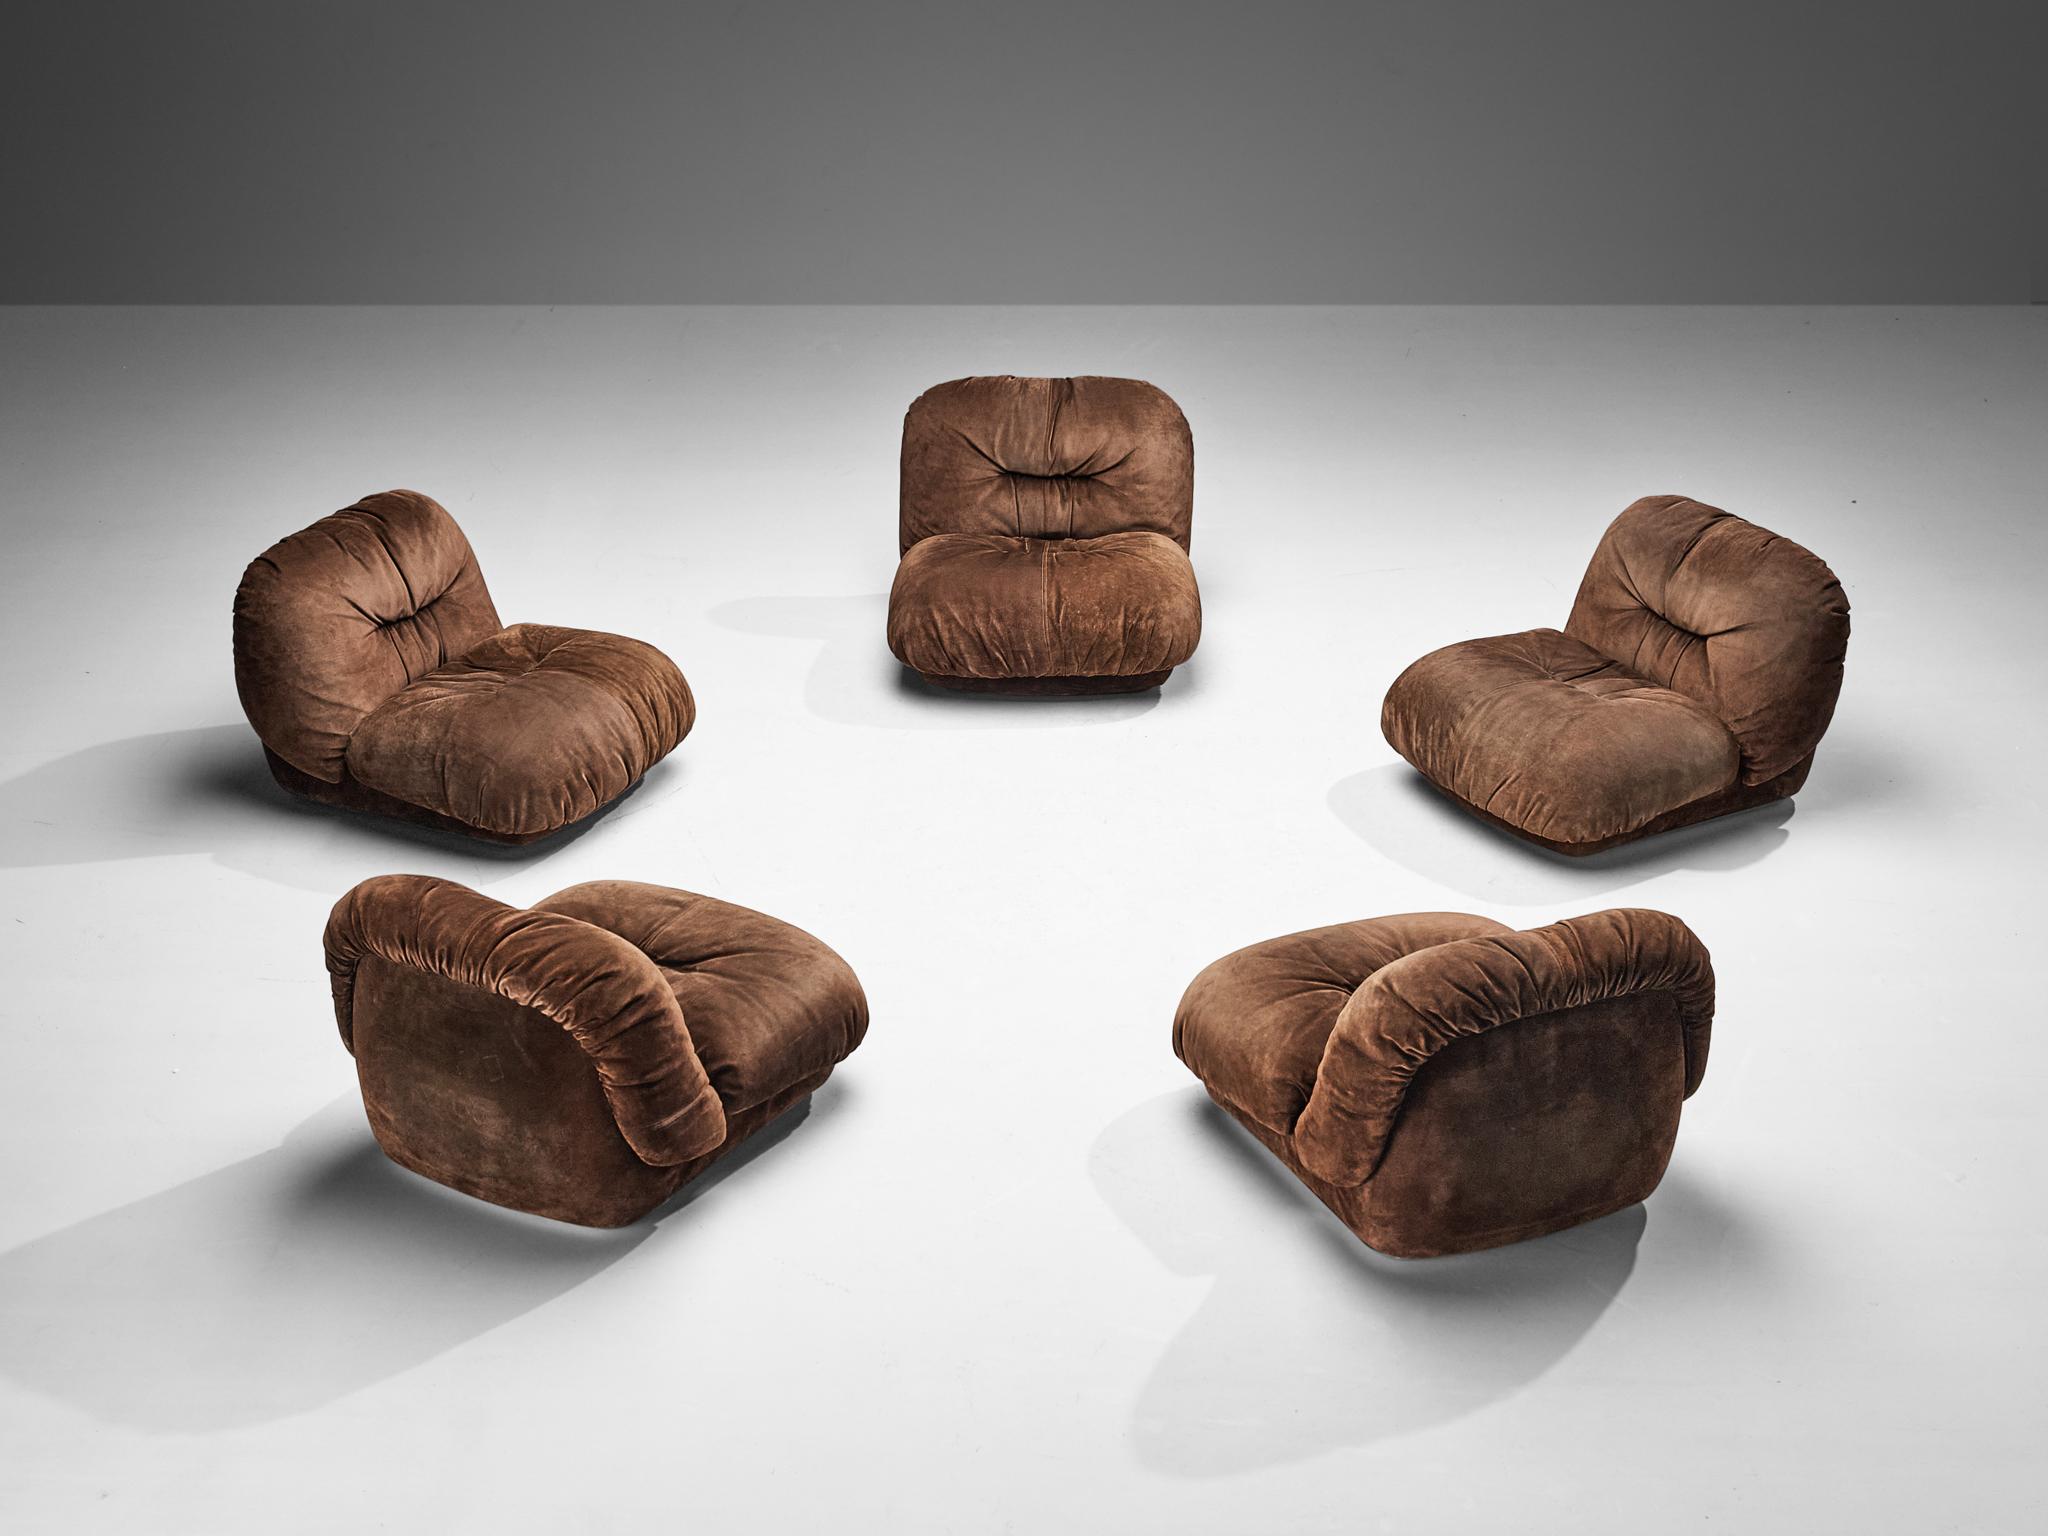 Alberto Rosselli for Saporiti, 'Maxijumbo' lounge chairs, suede, ABS plastic, Italy, 1970s 

Extremely comfortable lounge chairs designed by Alberto Rosselli for Saporiti.  These chairs are made to reach an ultimate level of comfort as can clearly